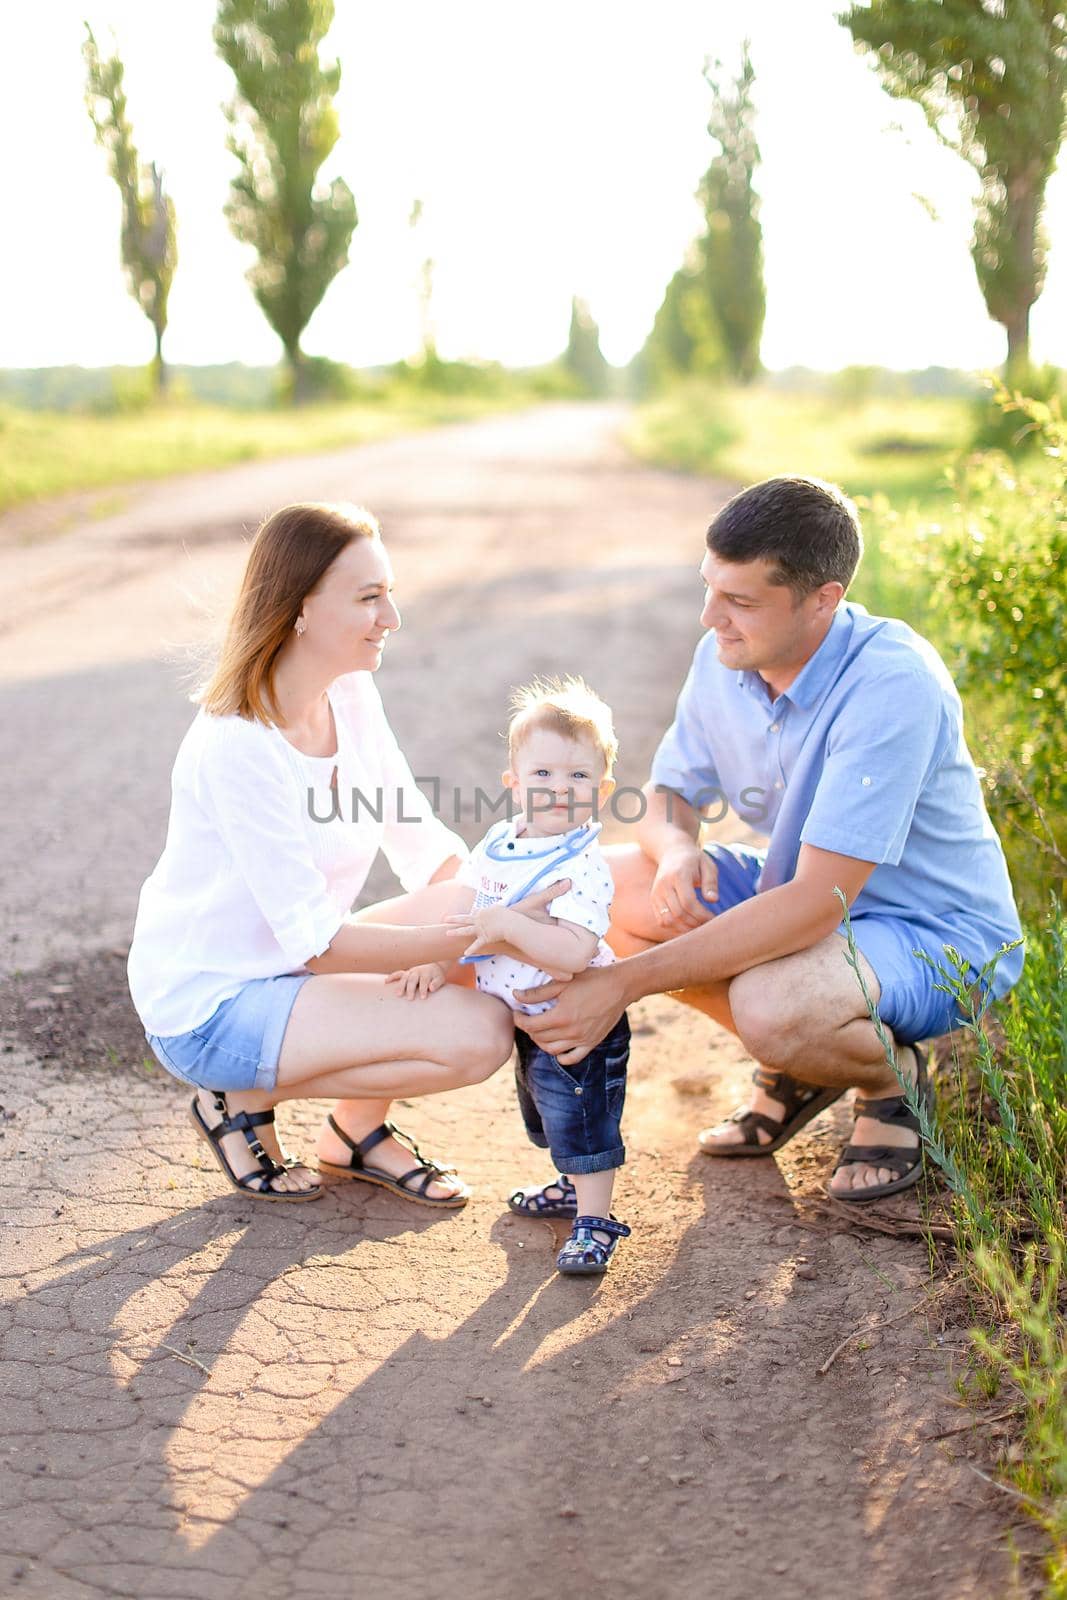 Happy young mother and father sitting on road with little baby, sunshine weather. Concept of parents and children, resting on nature.